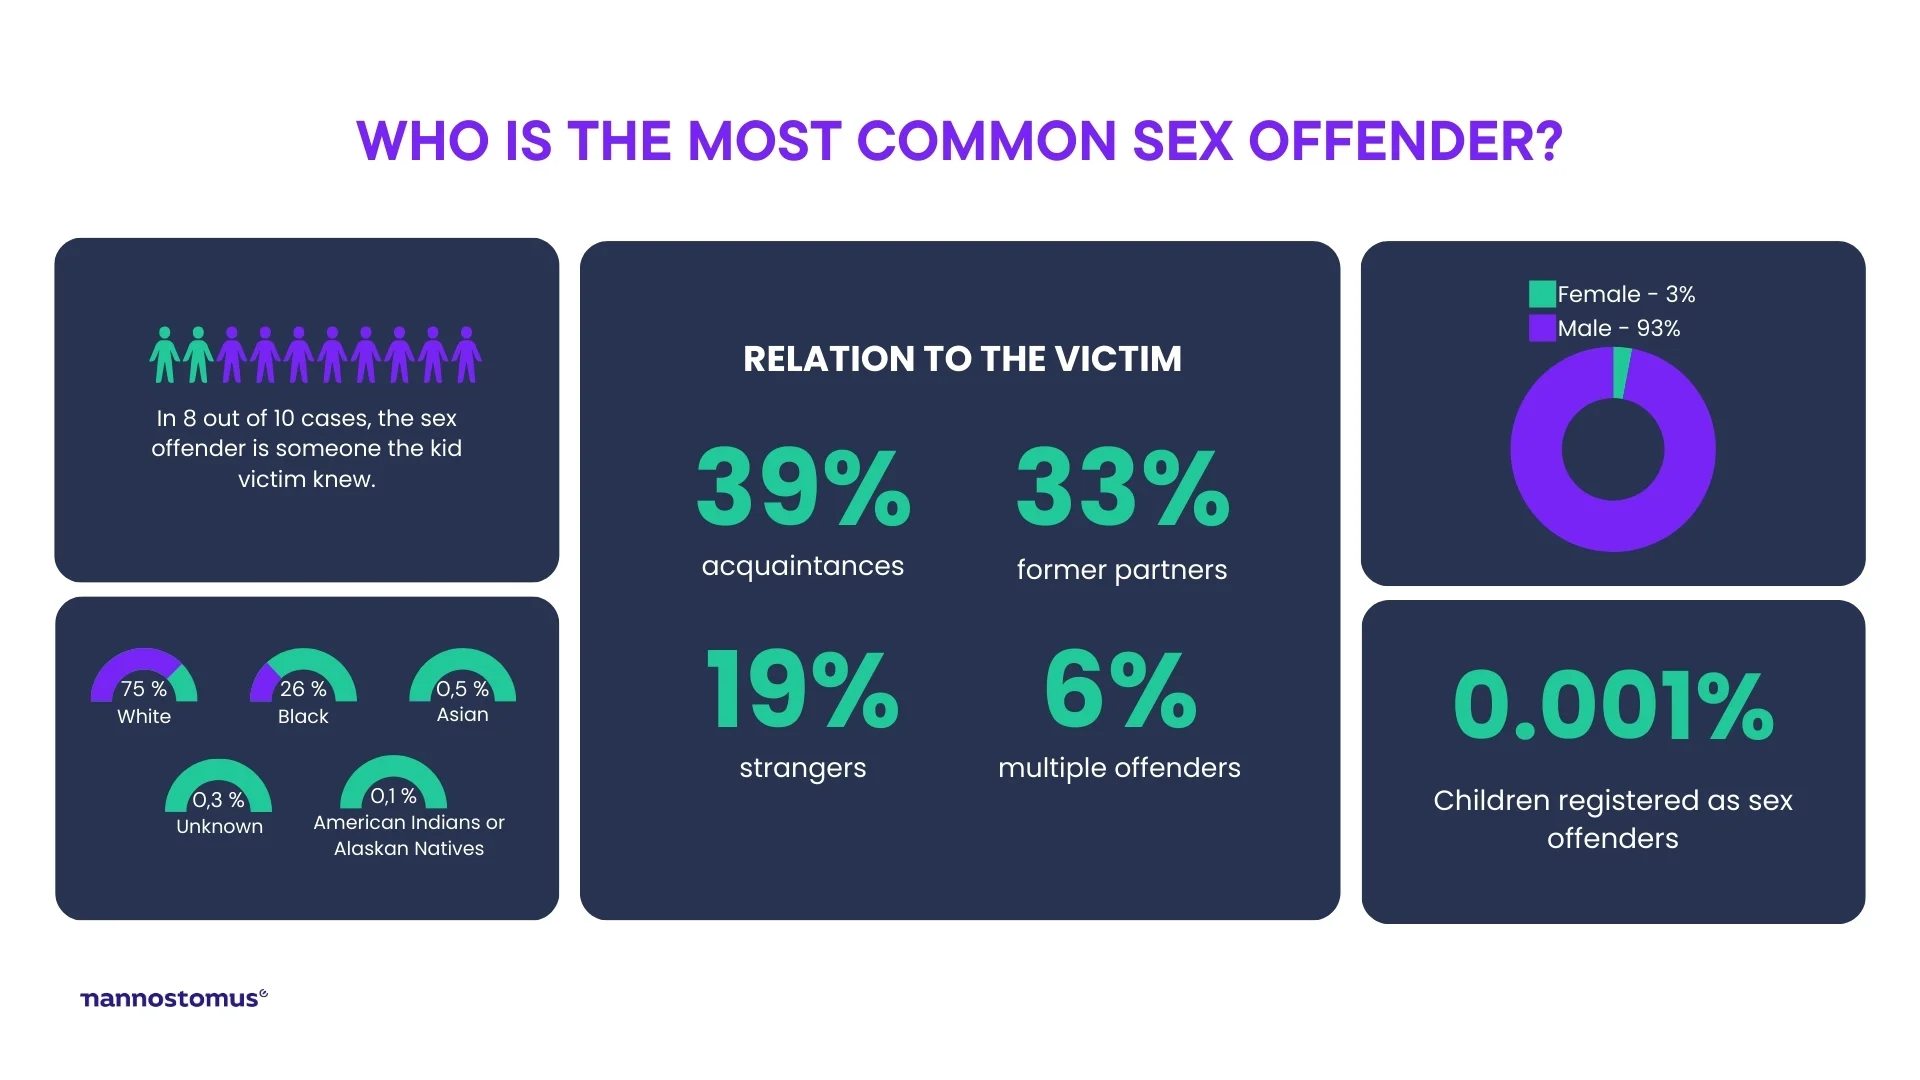 How many registered sex offenders are in the United States